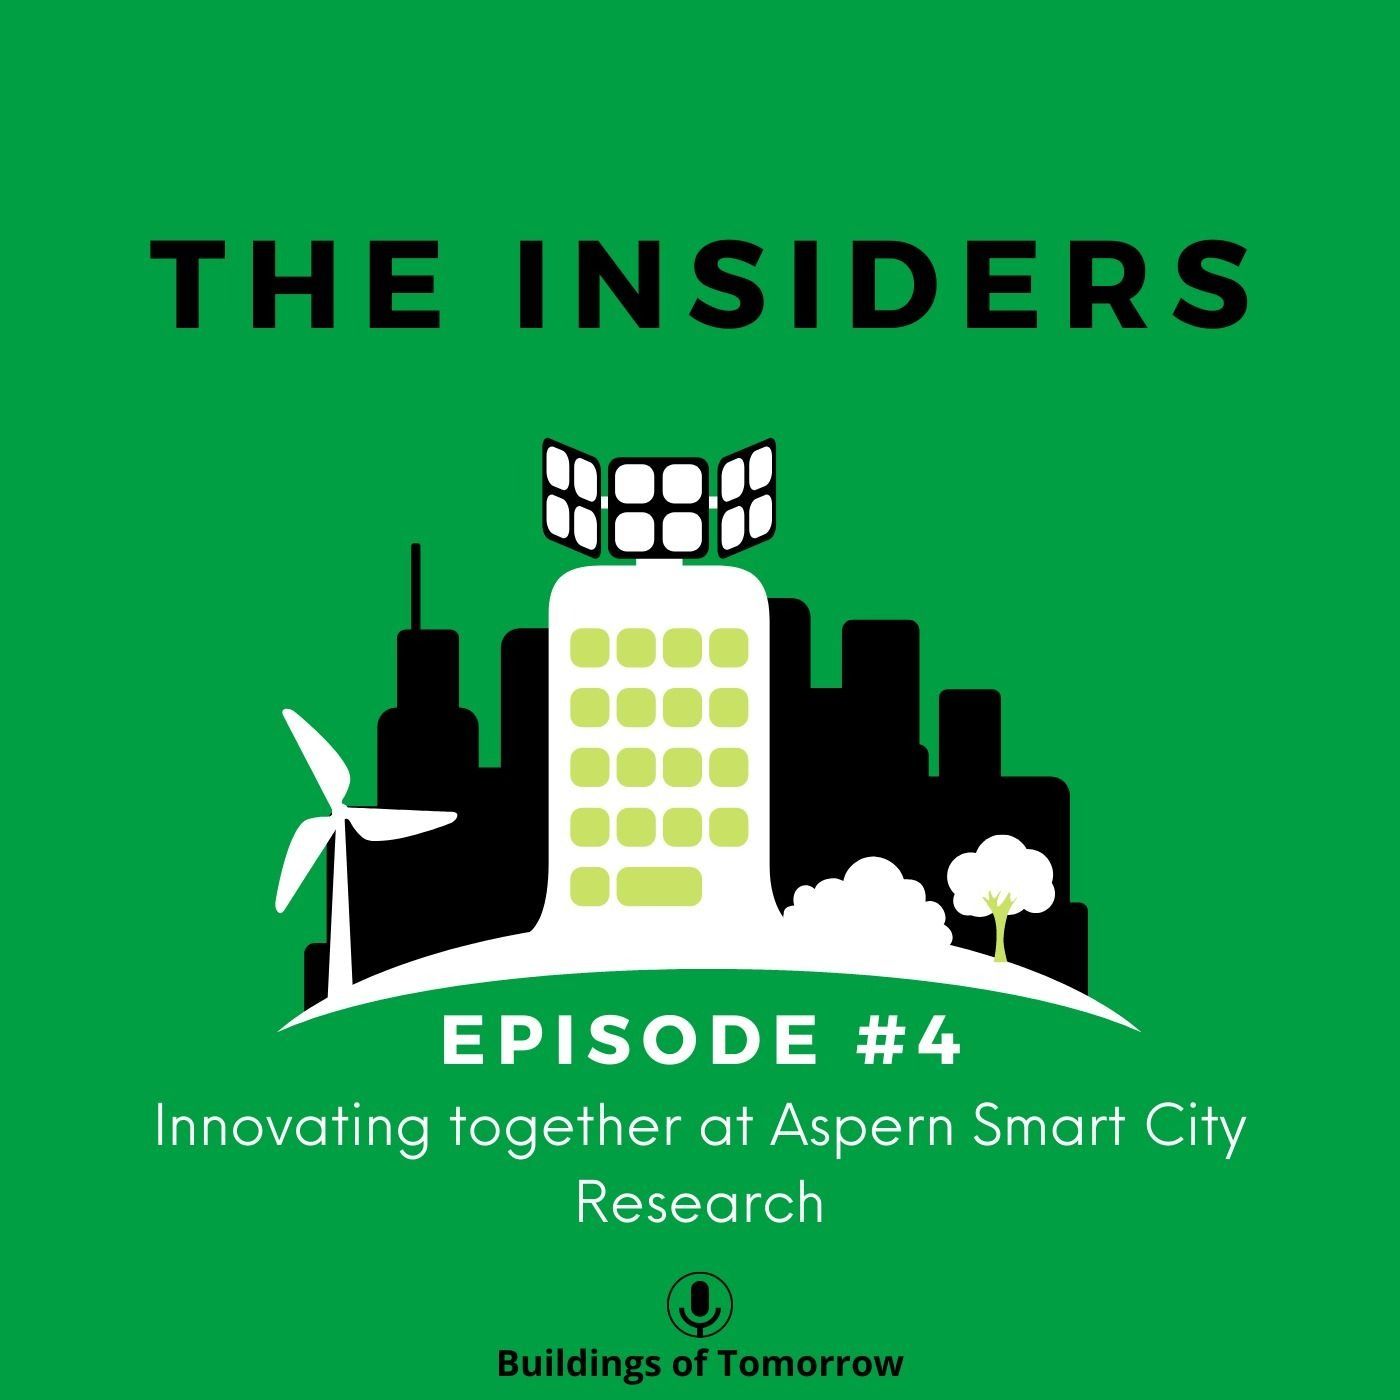 The Insiders: #4 Innovating together at Aspern Smart City Research